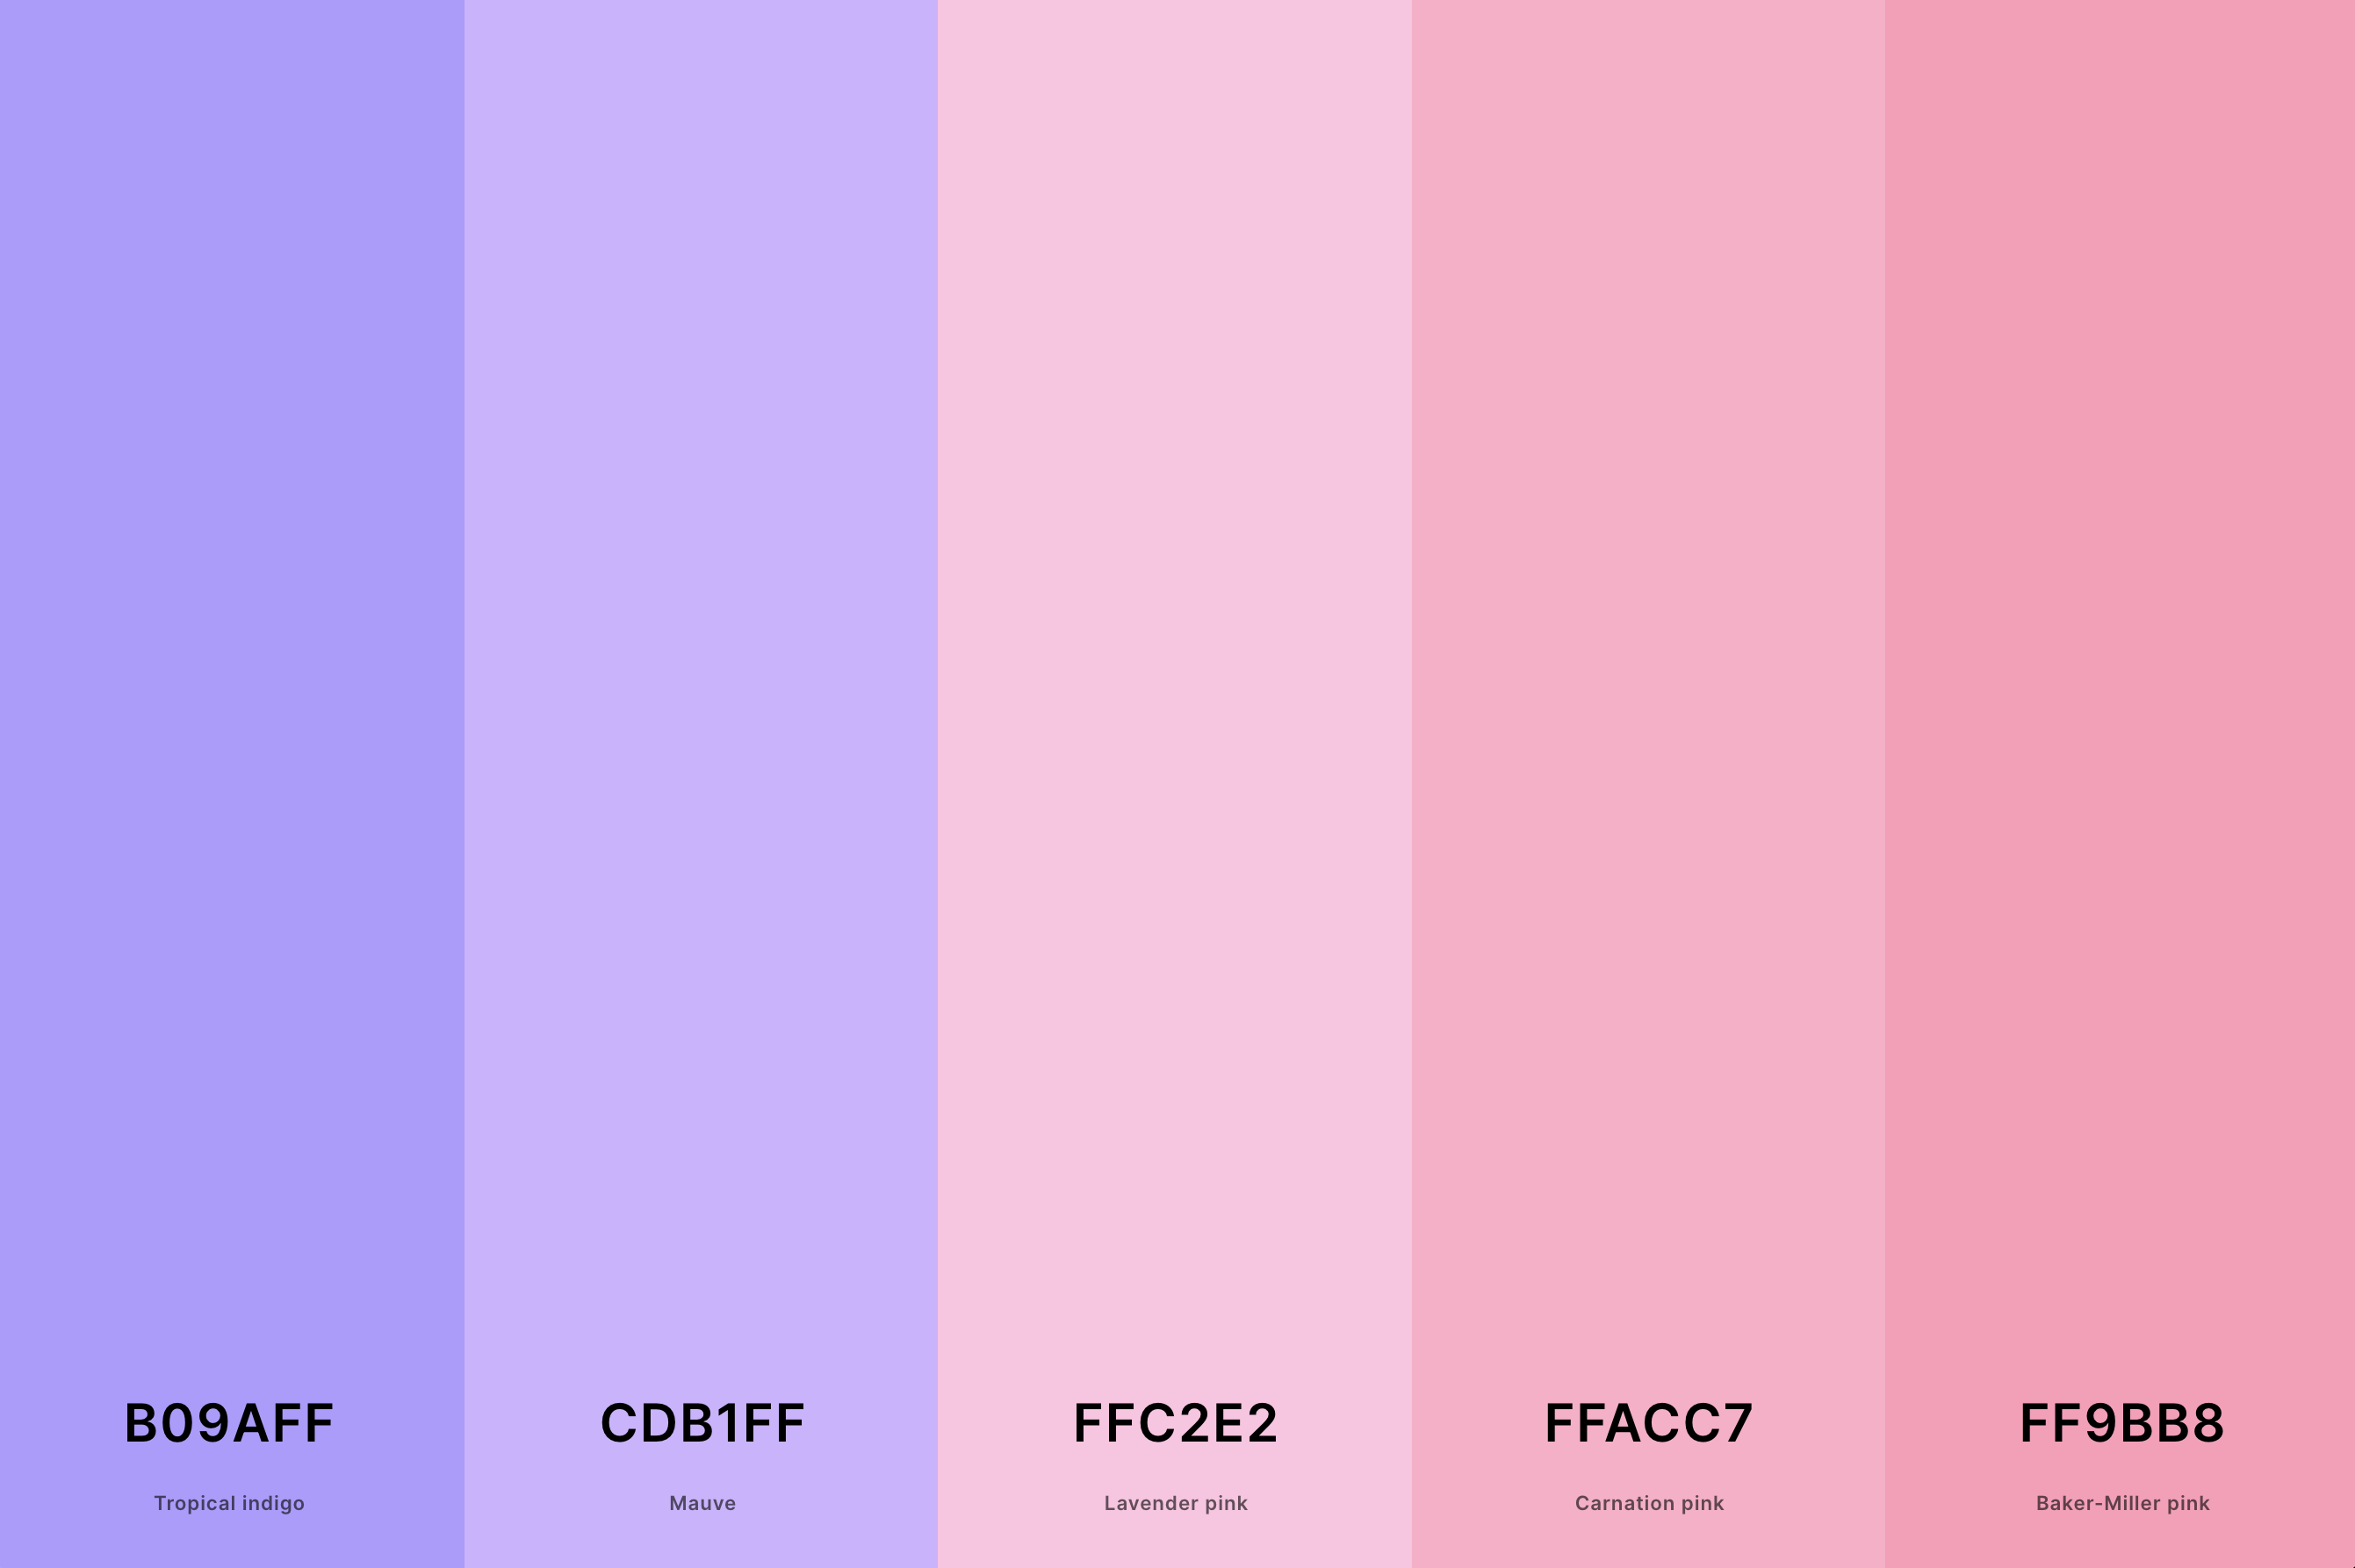 4. Pink And Purple Color Palette Color Palette with Tropical Indigo (Hex #B09AFF) + Mauve (Hex #CDB1FF) + Lavender Pink (Hex #FFC2E2) + Carnation Pink (Hex #FFACC7) + Baker-Miller Pink (Hex #FF9BB8) Color Palette with Hex Codes